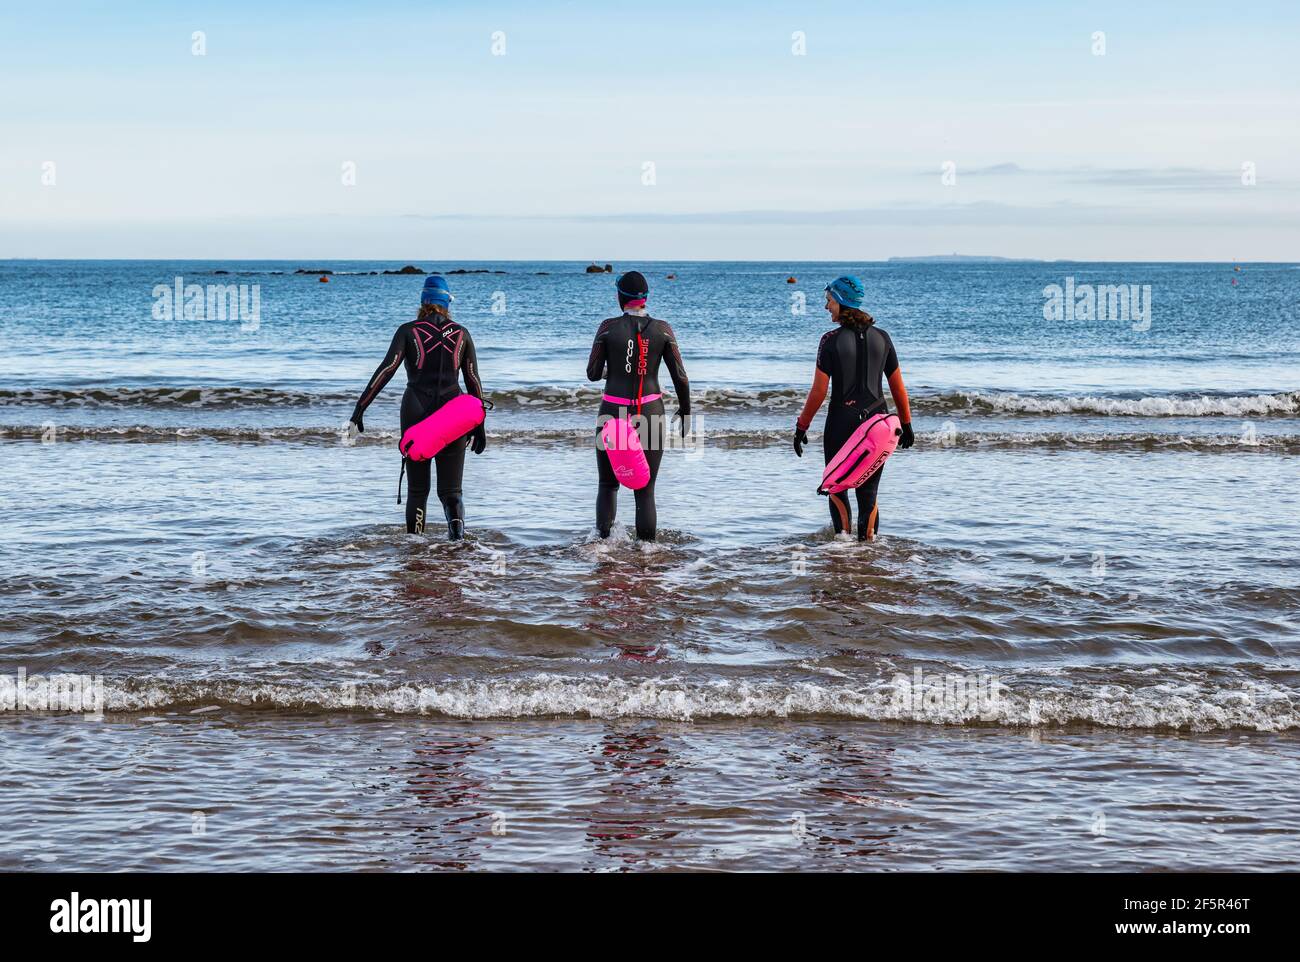 Wild or open water women swimmers wearing wetsuits with buoyancy floats enter the Firth of Forth sea, North Berwick, East Lothian, Scotland, UK Stock Photo